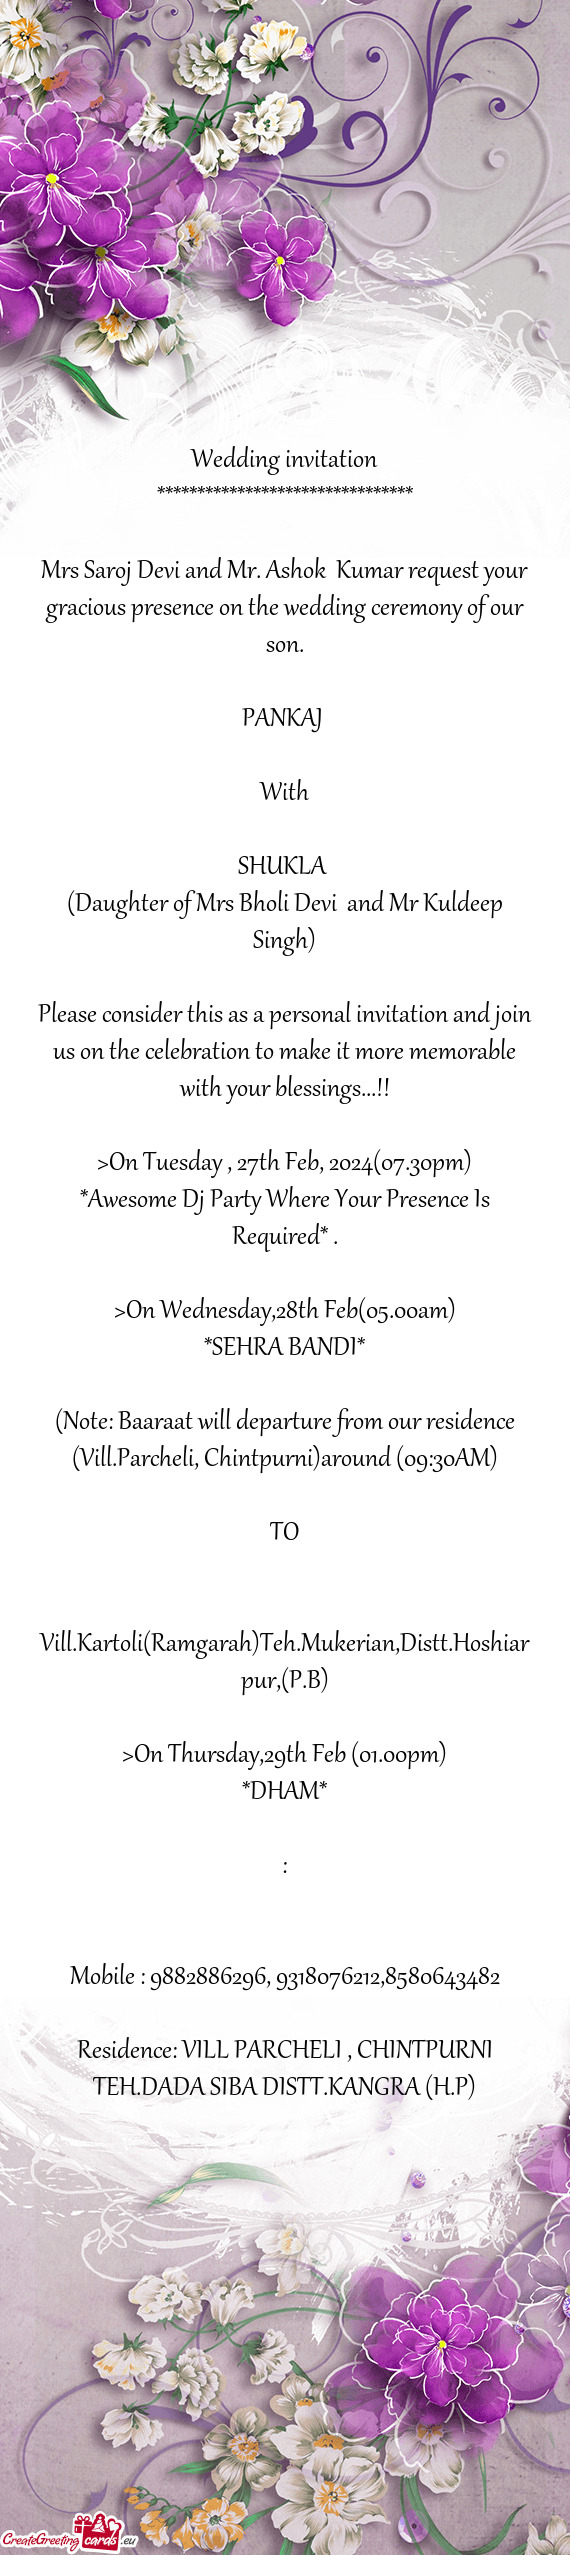 Mrs Saroj Devi and Mr. Ashok Kumar request your gracious presence on the wedding ceremony of our so